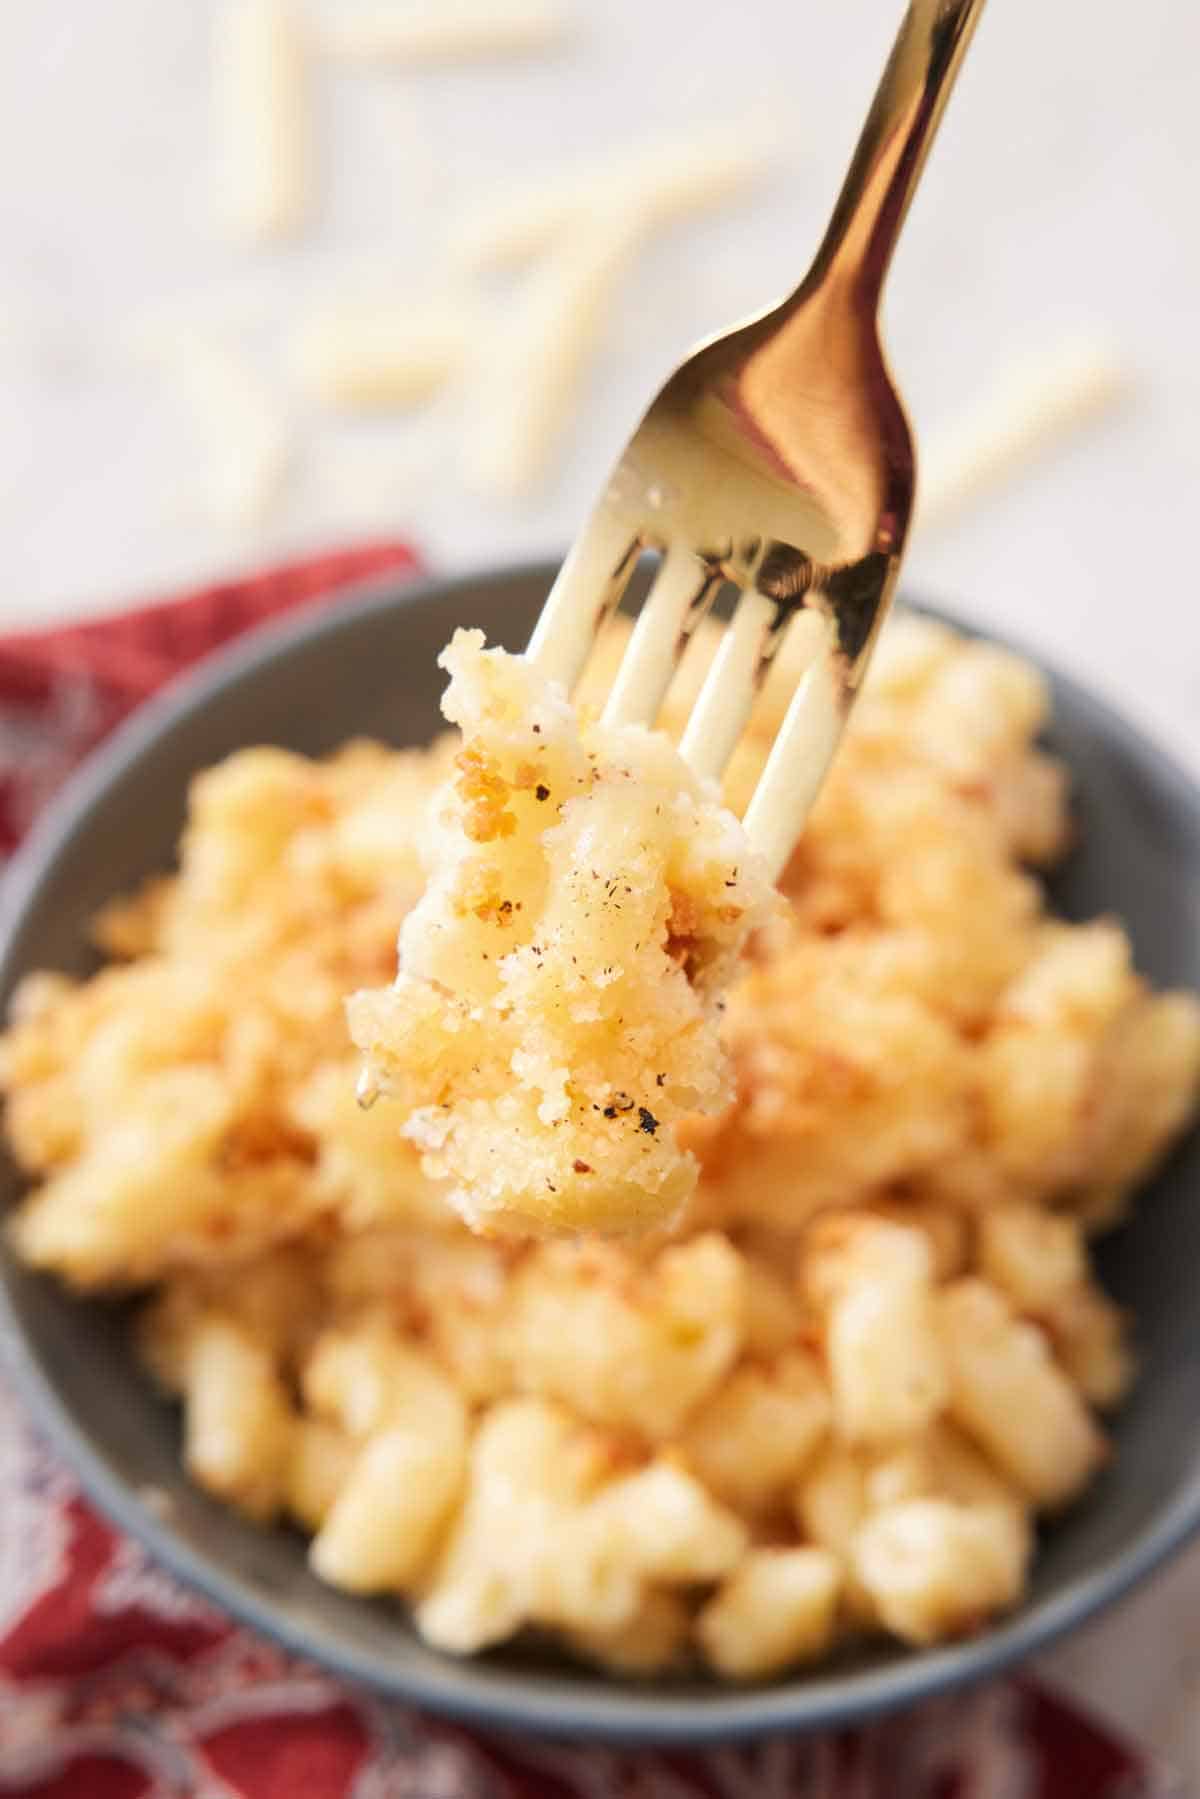 A forkful of truffle mac and cheese lifted from a bowl.